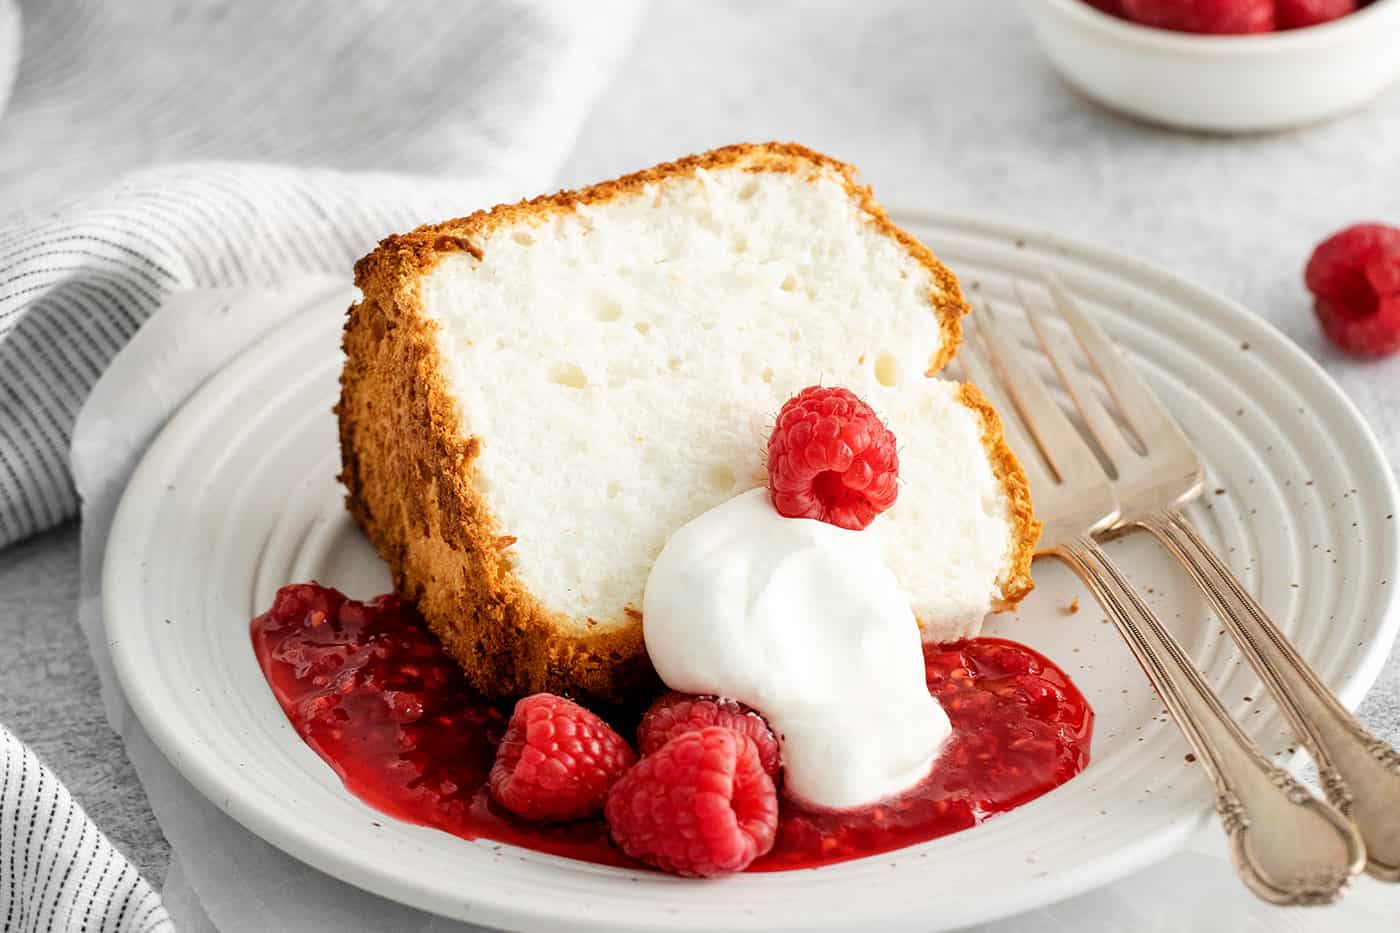 A slice of angel food cake with raspberry sauce and whipped cream